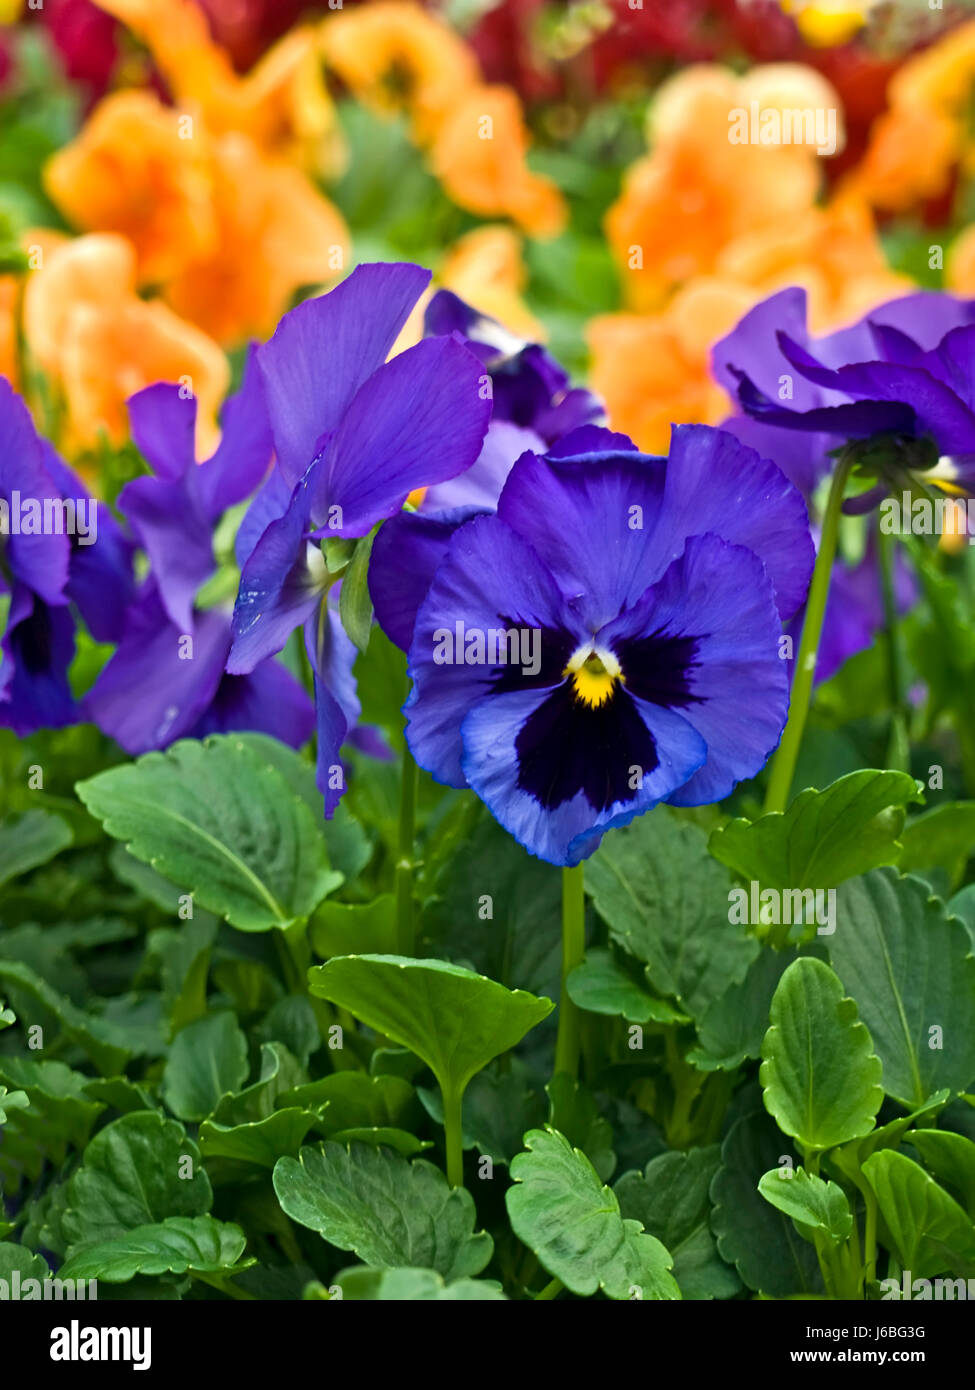 flower plant hardy pansy blue garden flower plant coloured colourful gorgeous Stock Photo